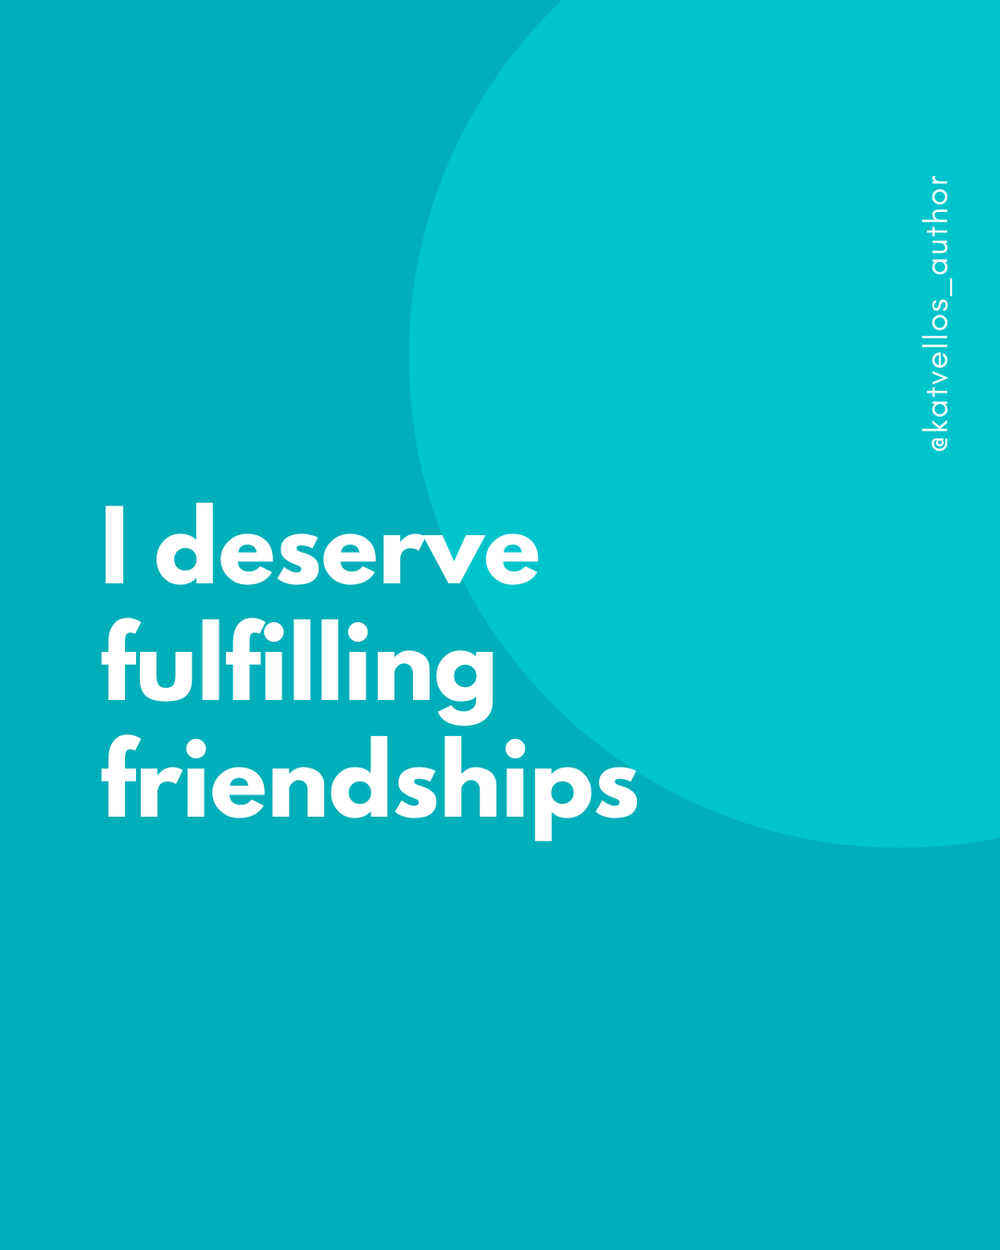 Friendship Affirmations by Kat Vellos at weshouldgettogether.com1.png